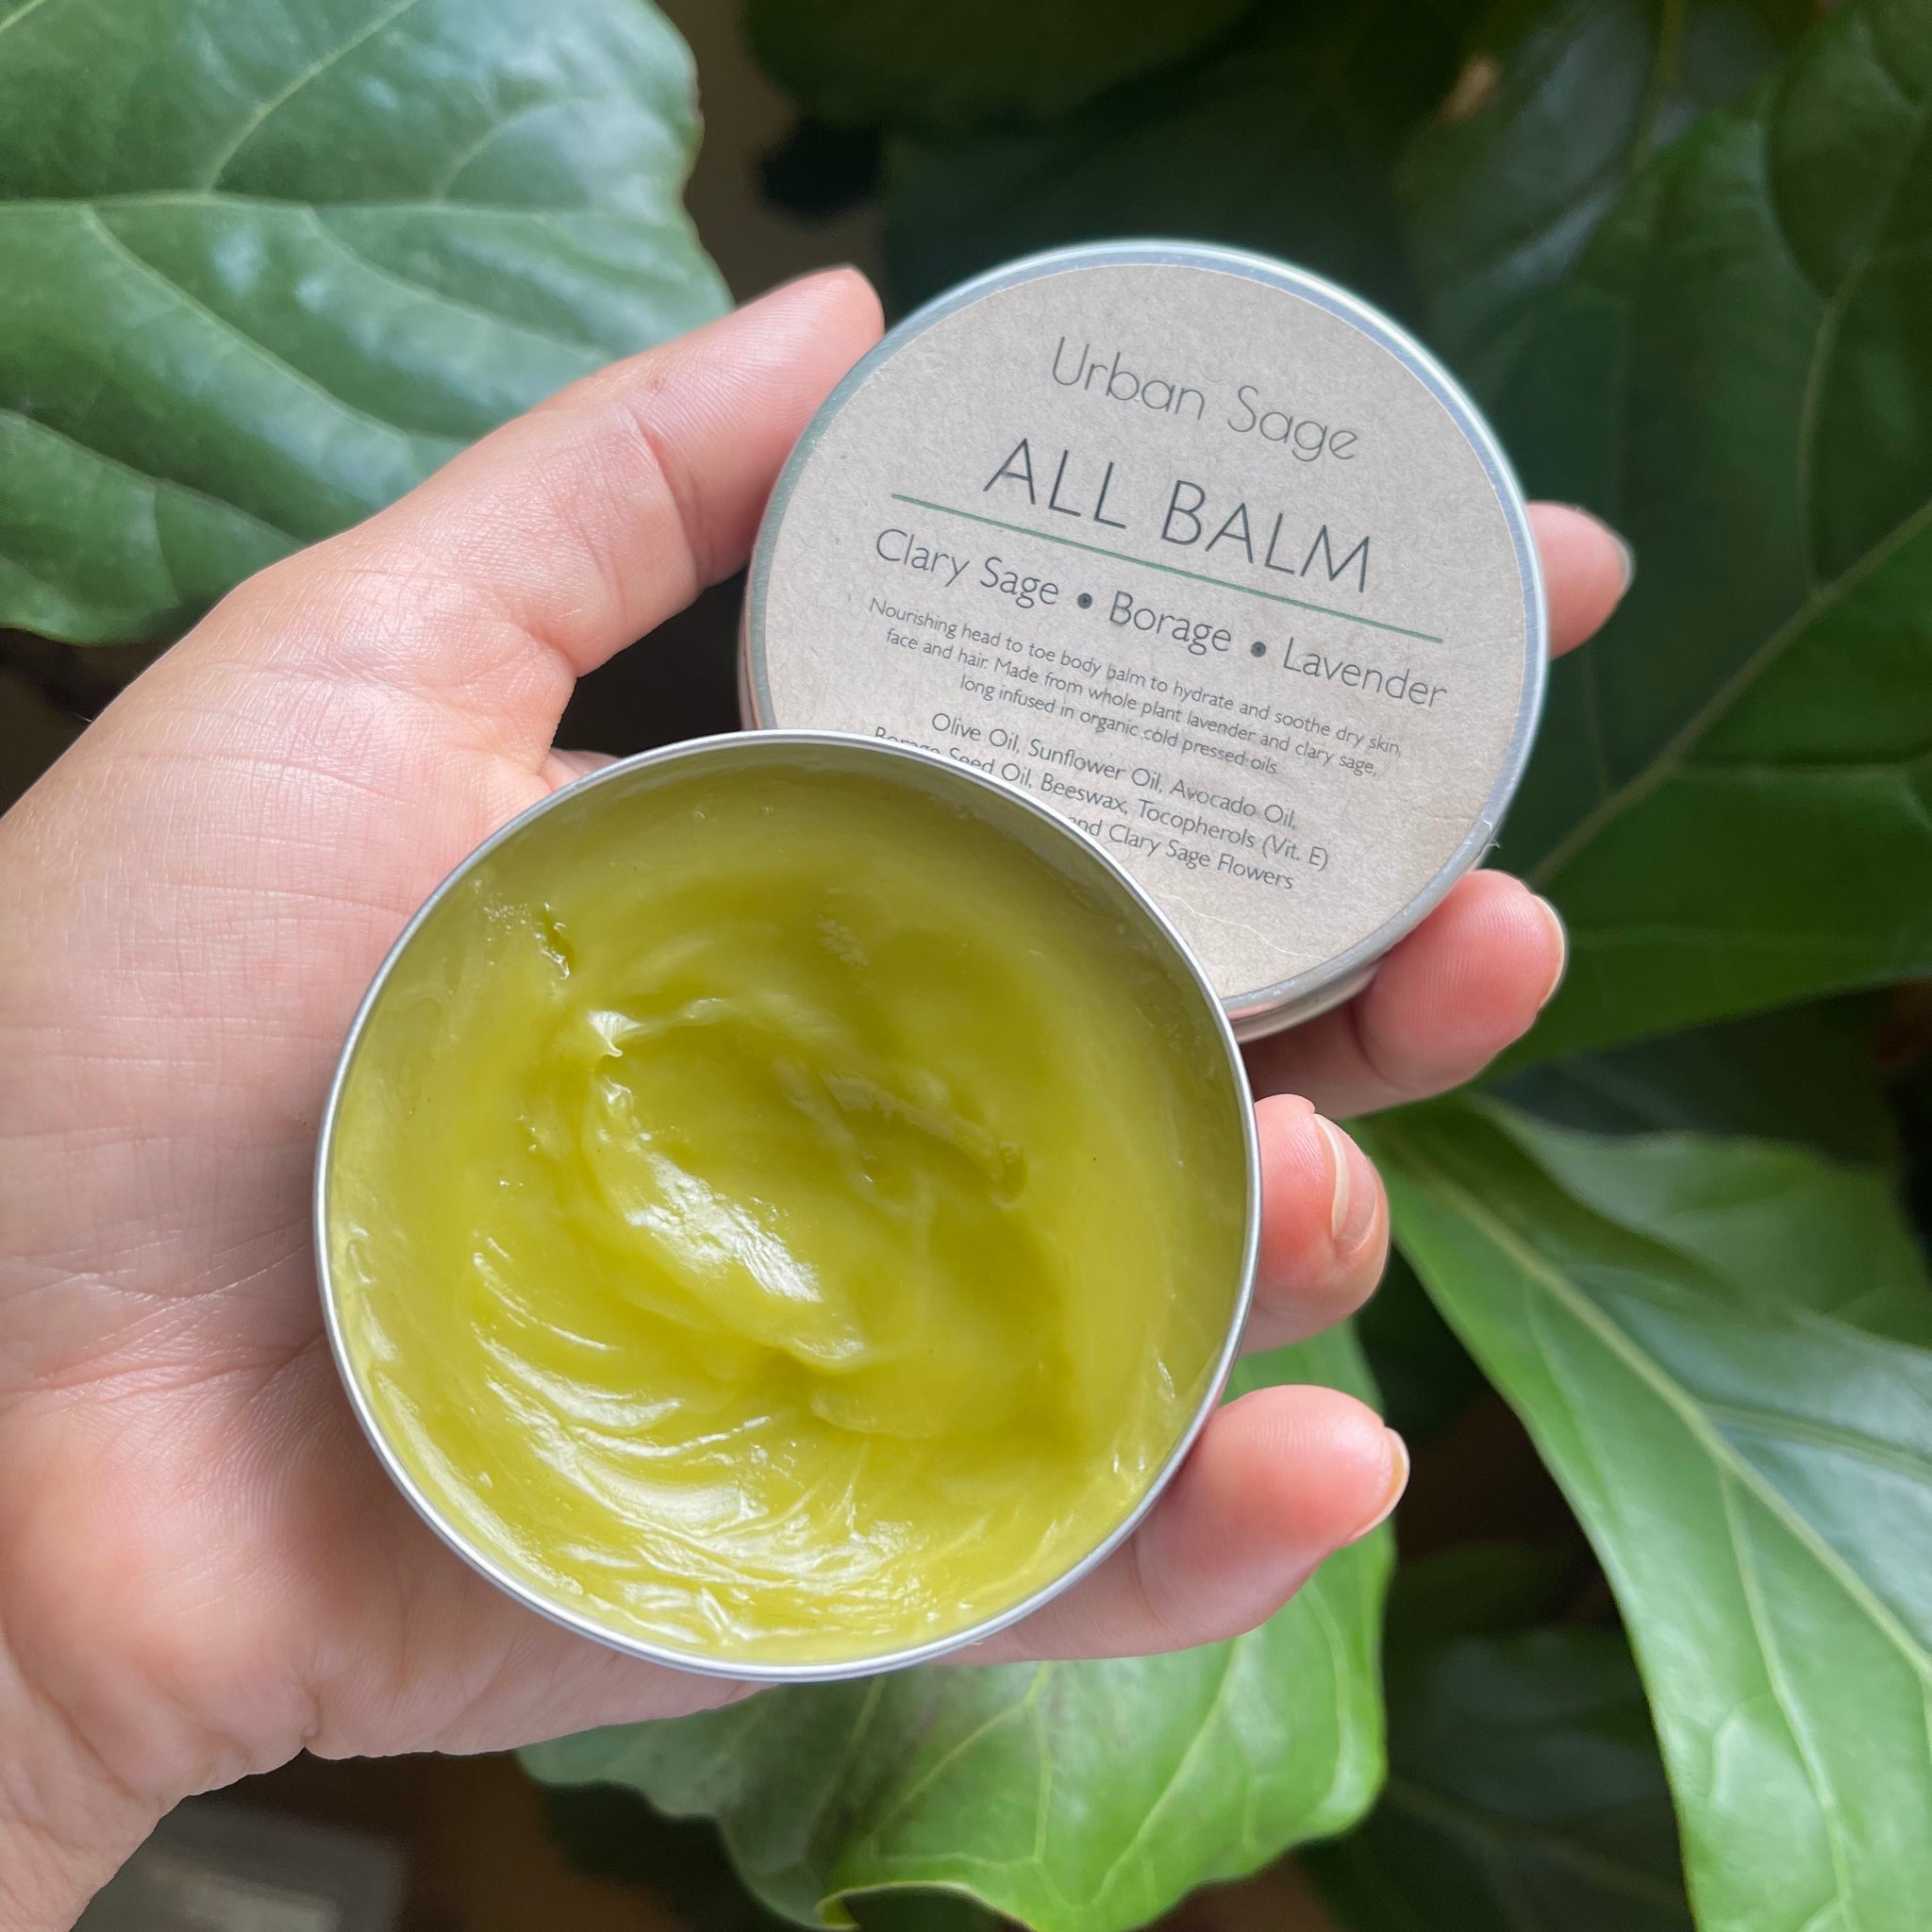 All Balm - Clary Sage and Lavender